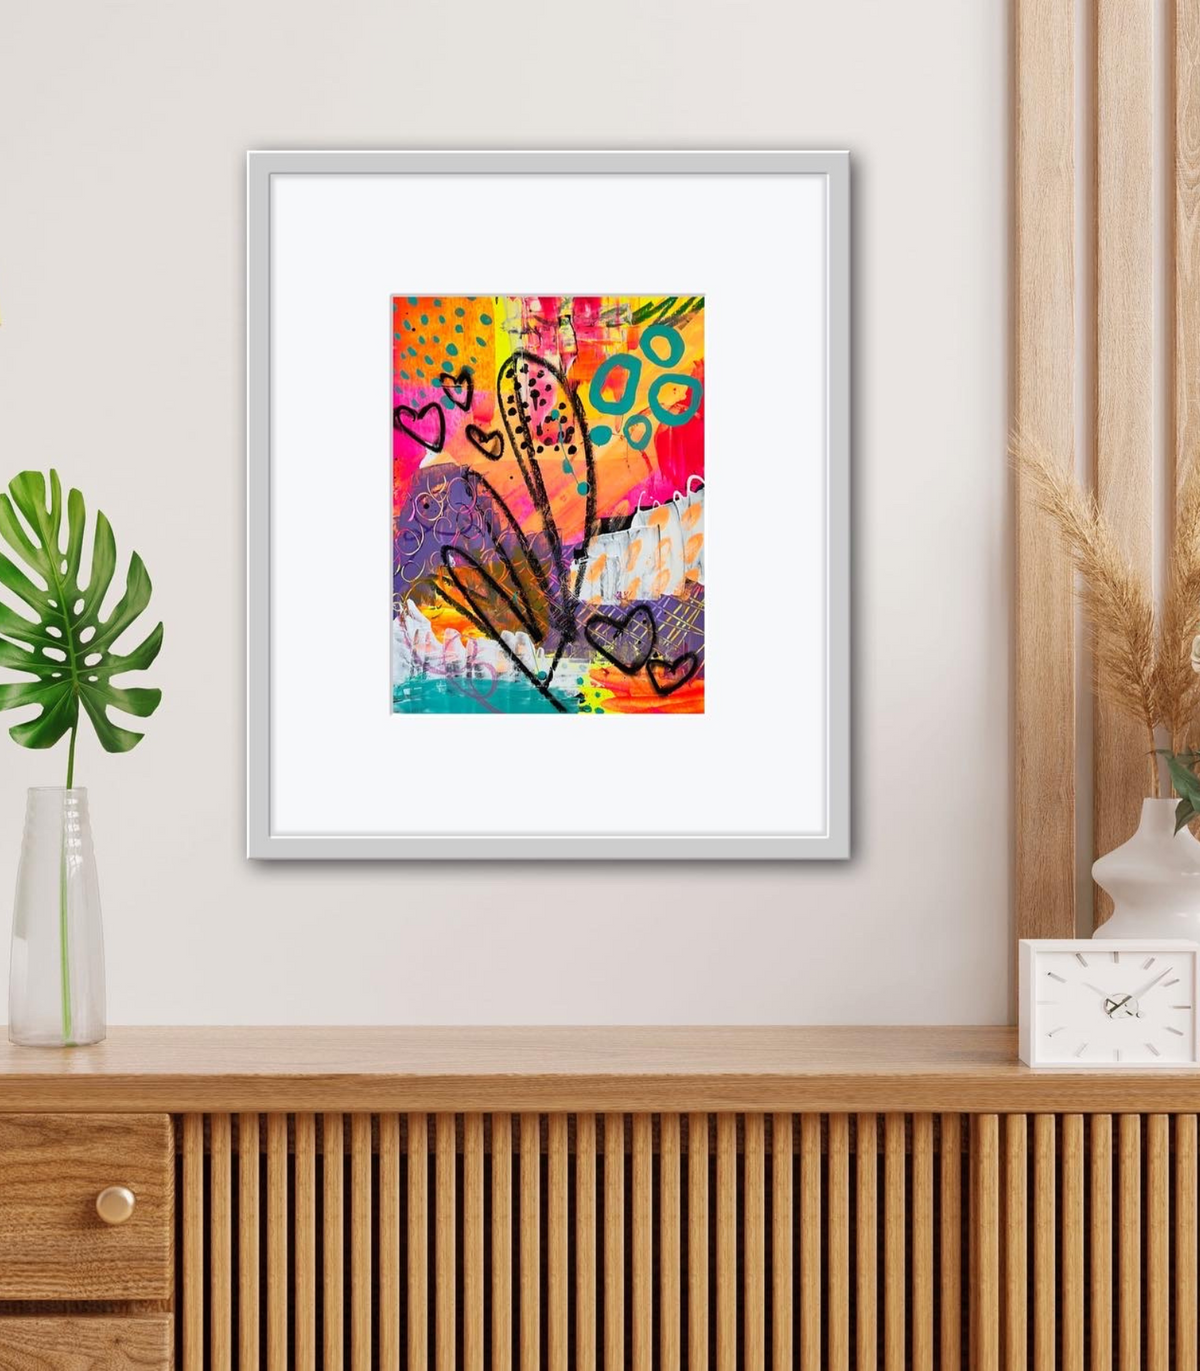 Shana Recker Art neon paint print framed in a white frame and hung on wall.